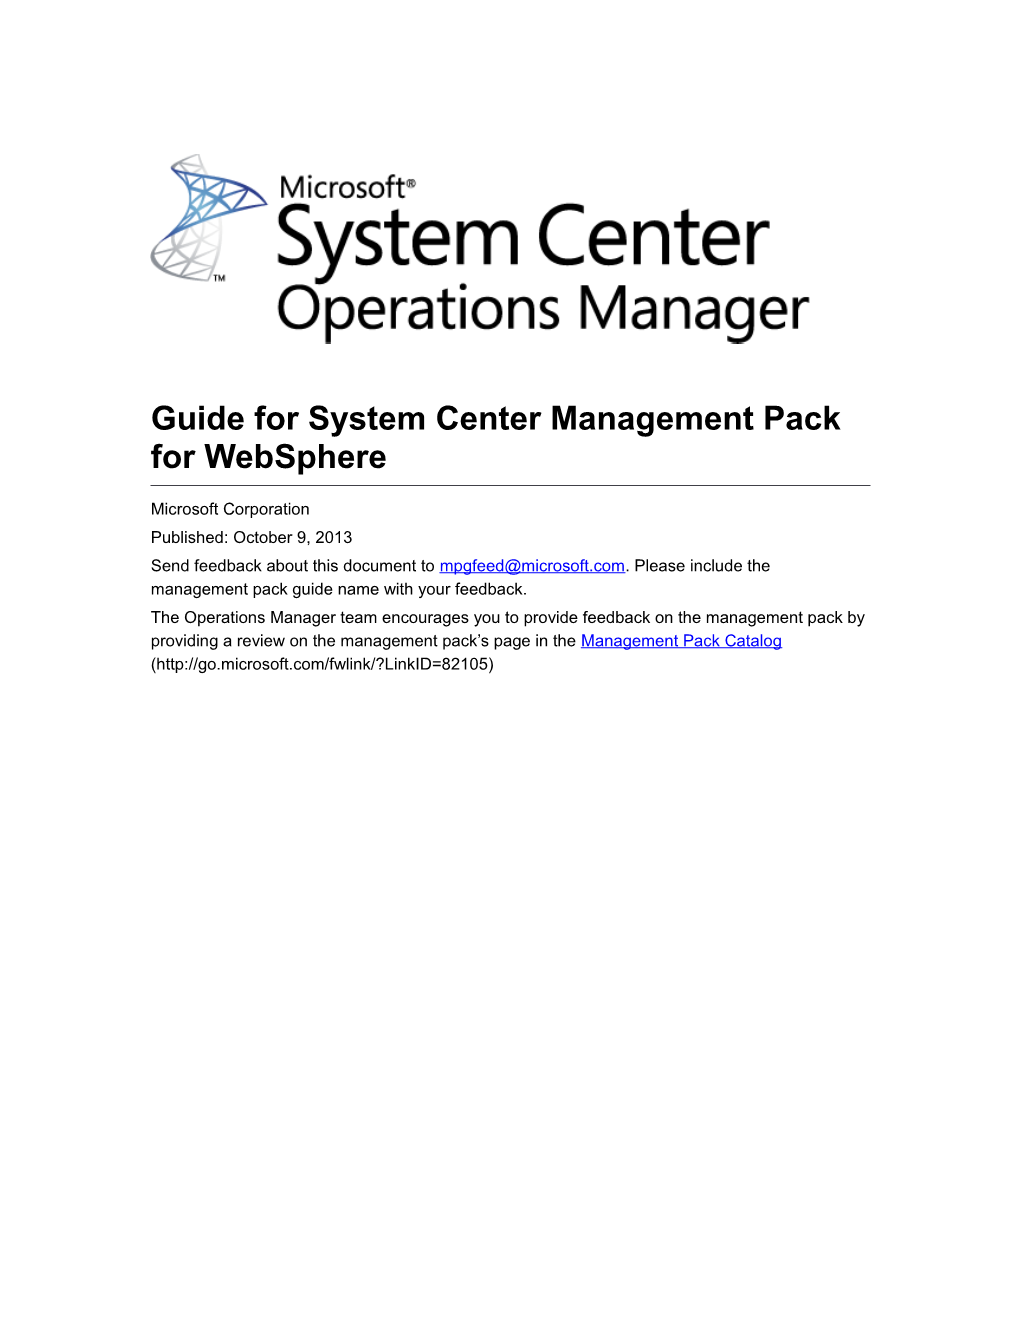 Guide for System Center Management Pack for Websphere